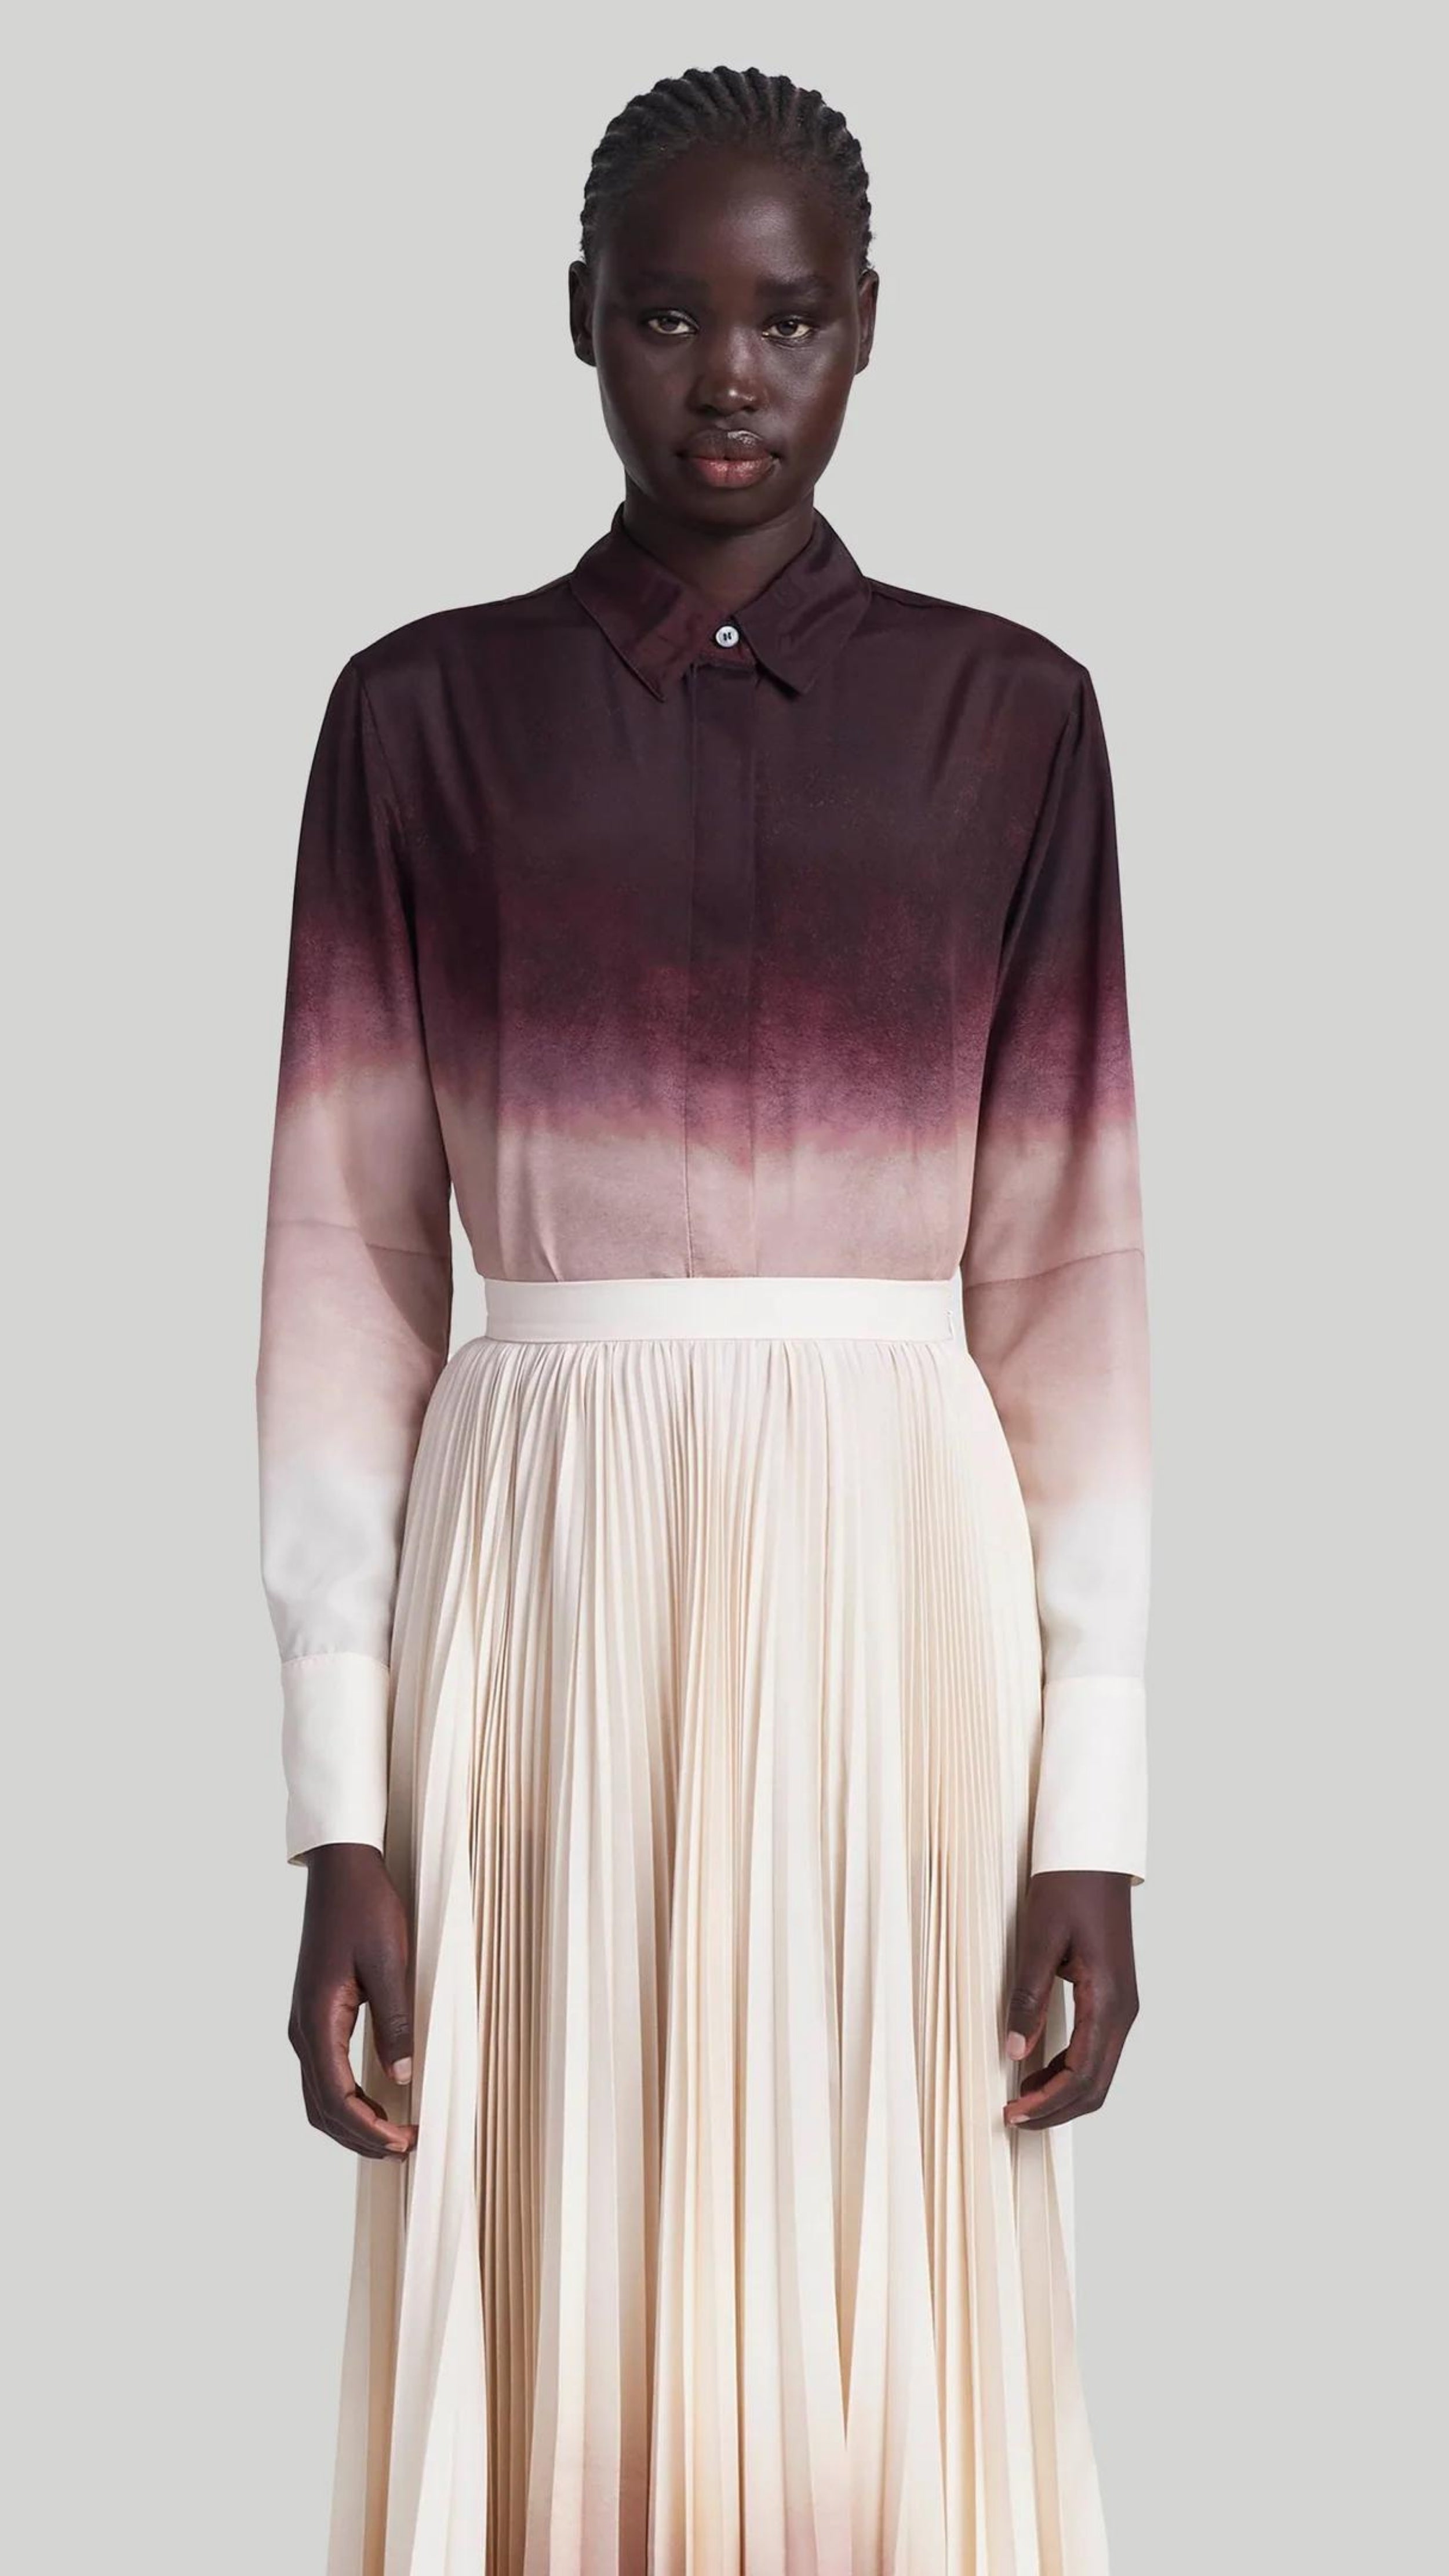 Altuzarra The Chika Top is crafted from Italian silk in an elegant cranberry to ivory dip dye ombre. The classic style button down shirt features a small point collar, concealed button front closure, and long cuffed sleeves. Shown on model facing front.